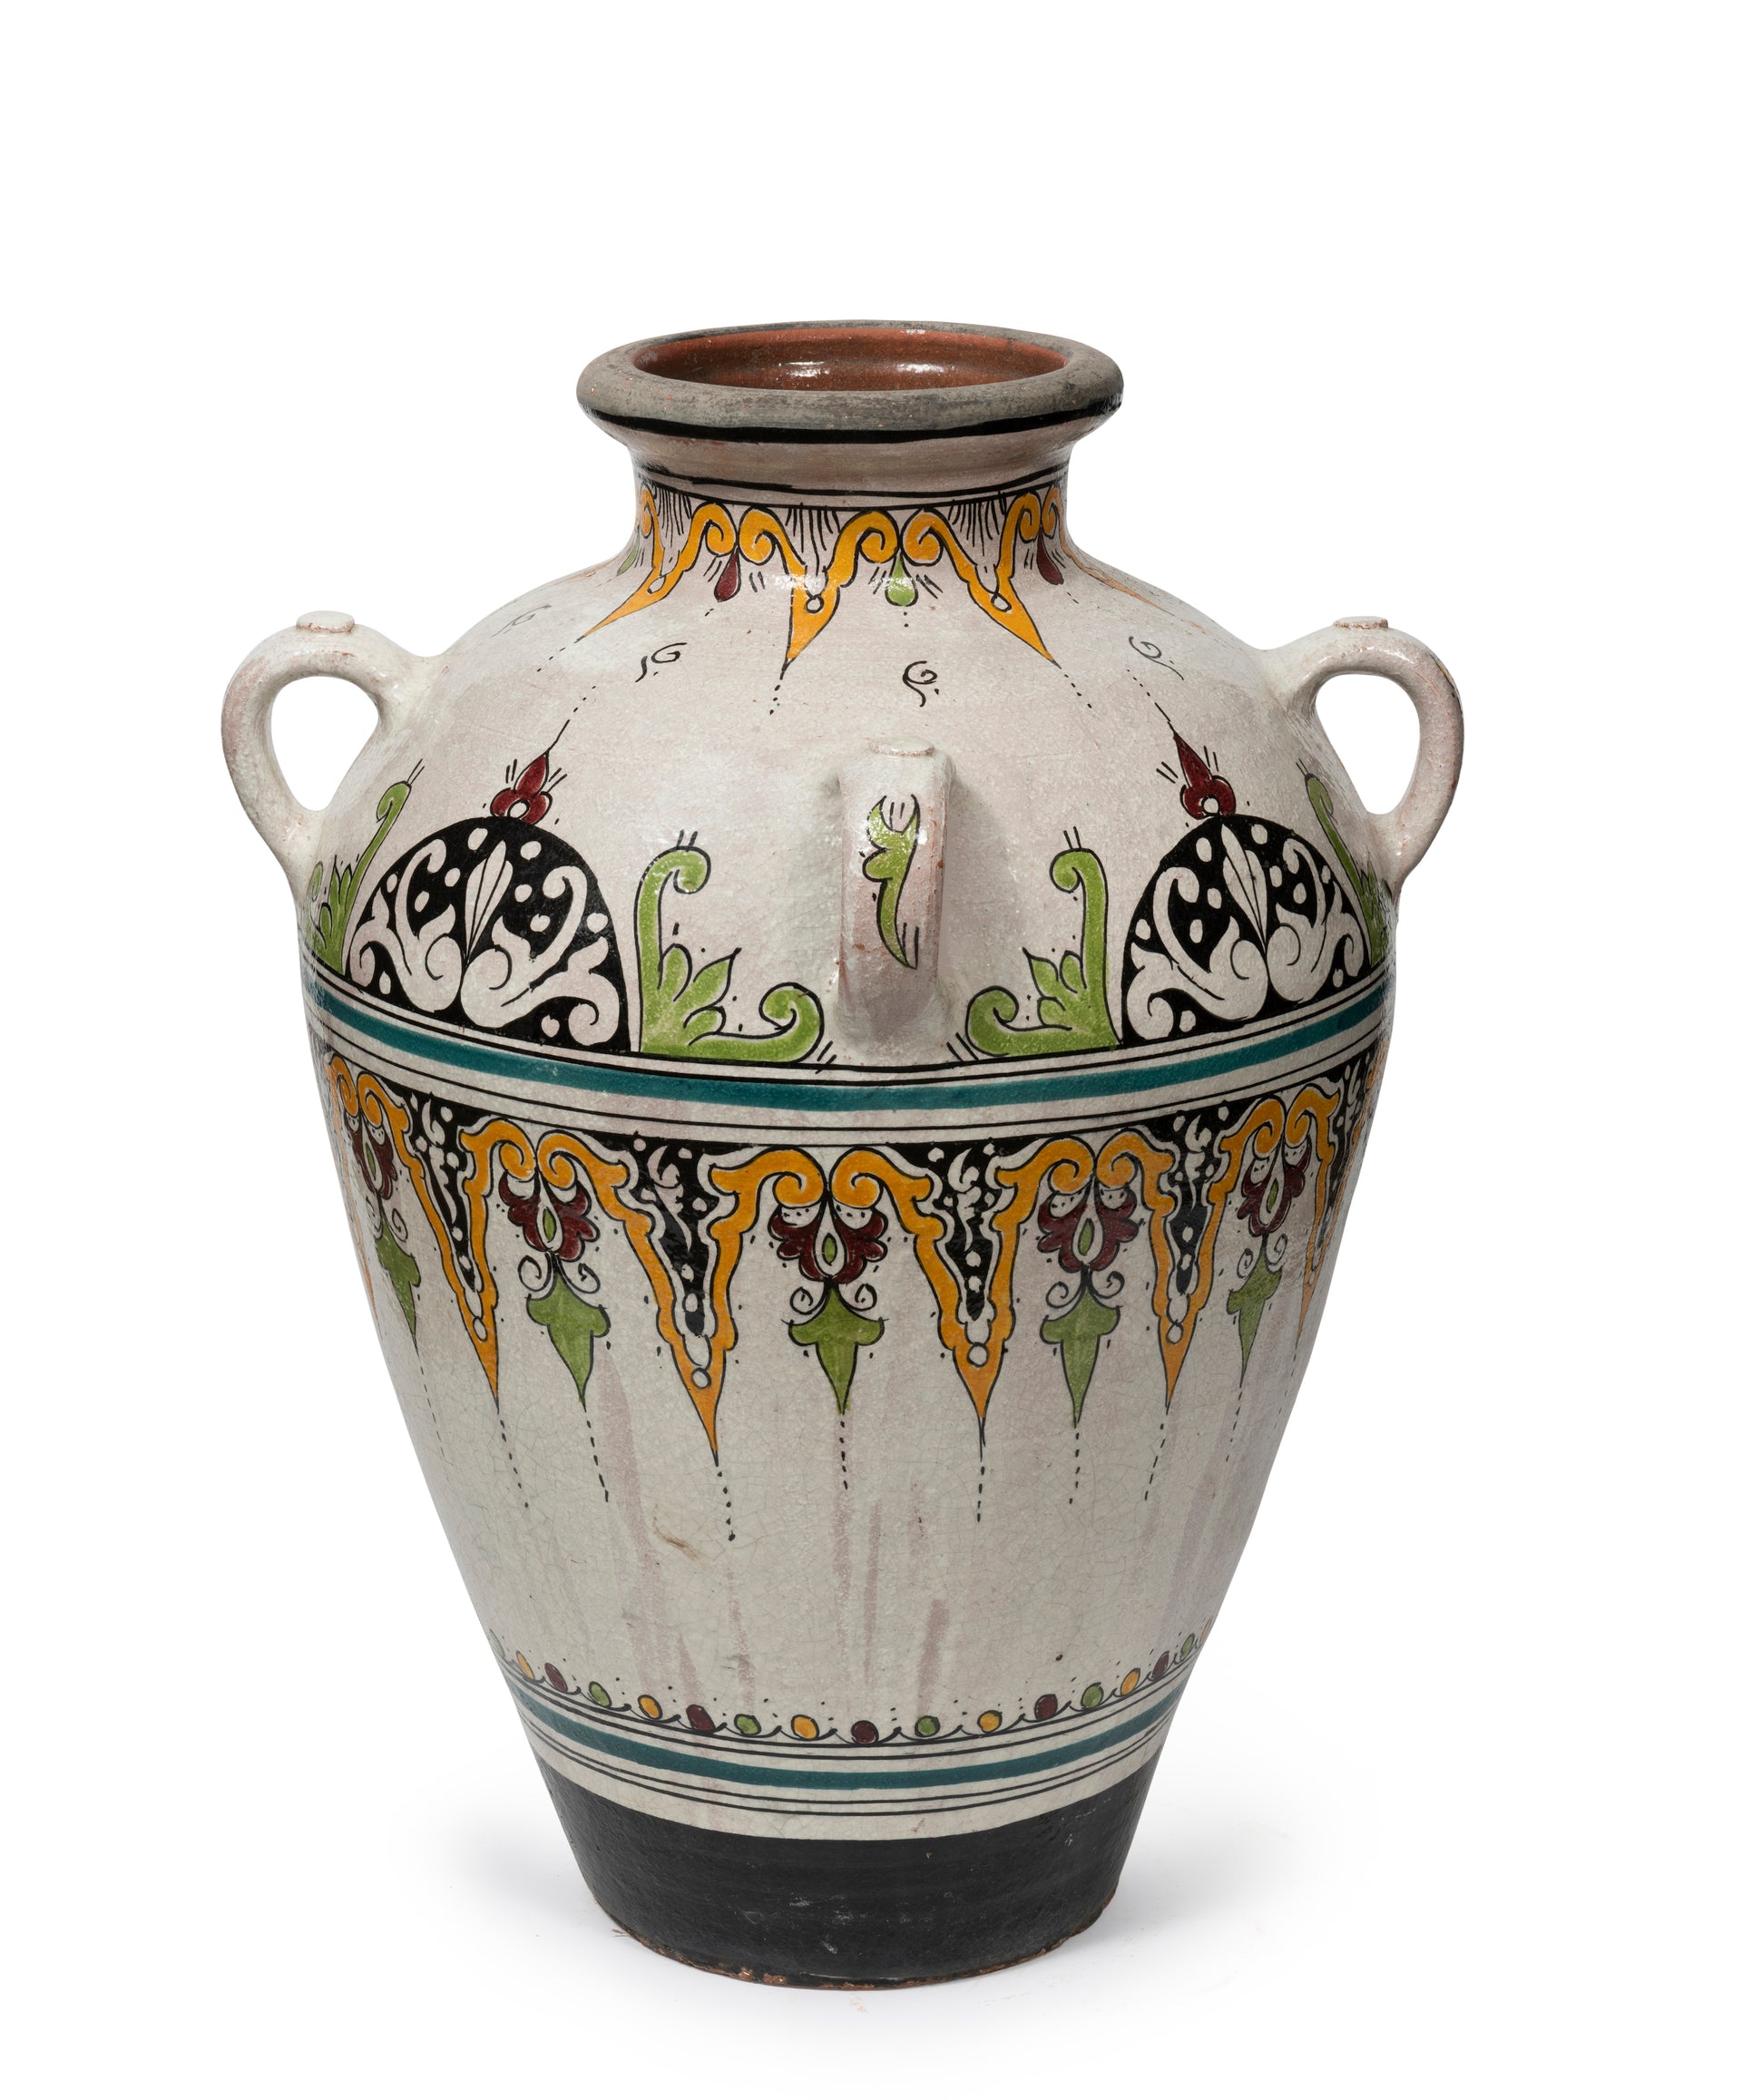 SOLD A Moroccan glazed and beautifully painted terracotta amphora